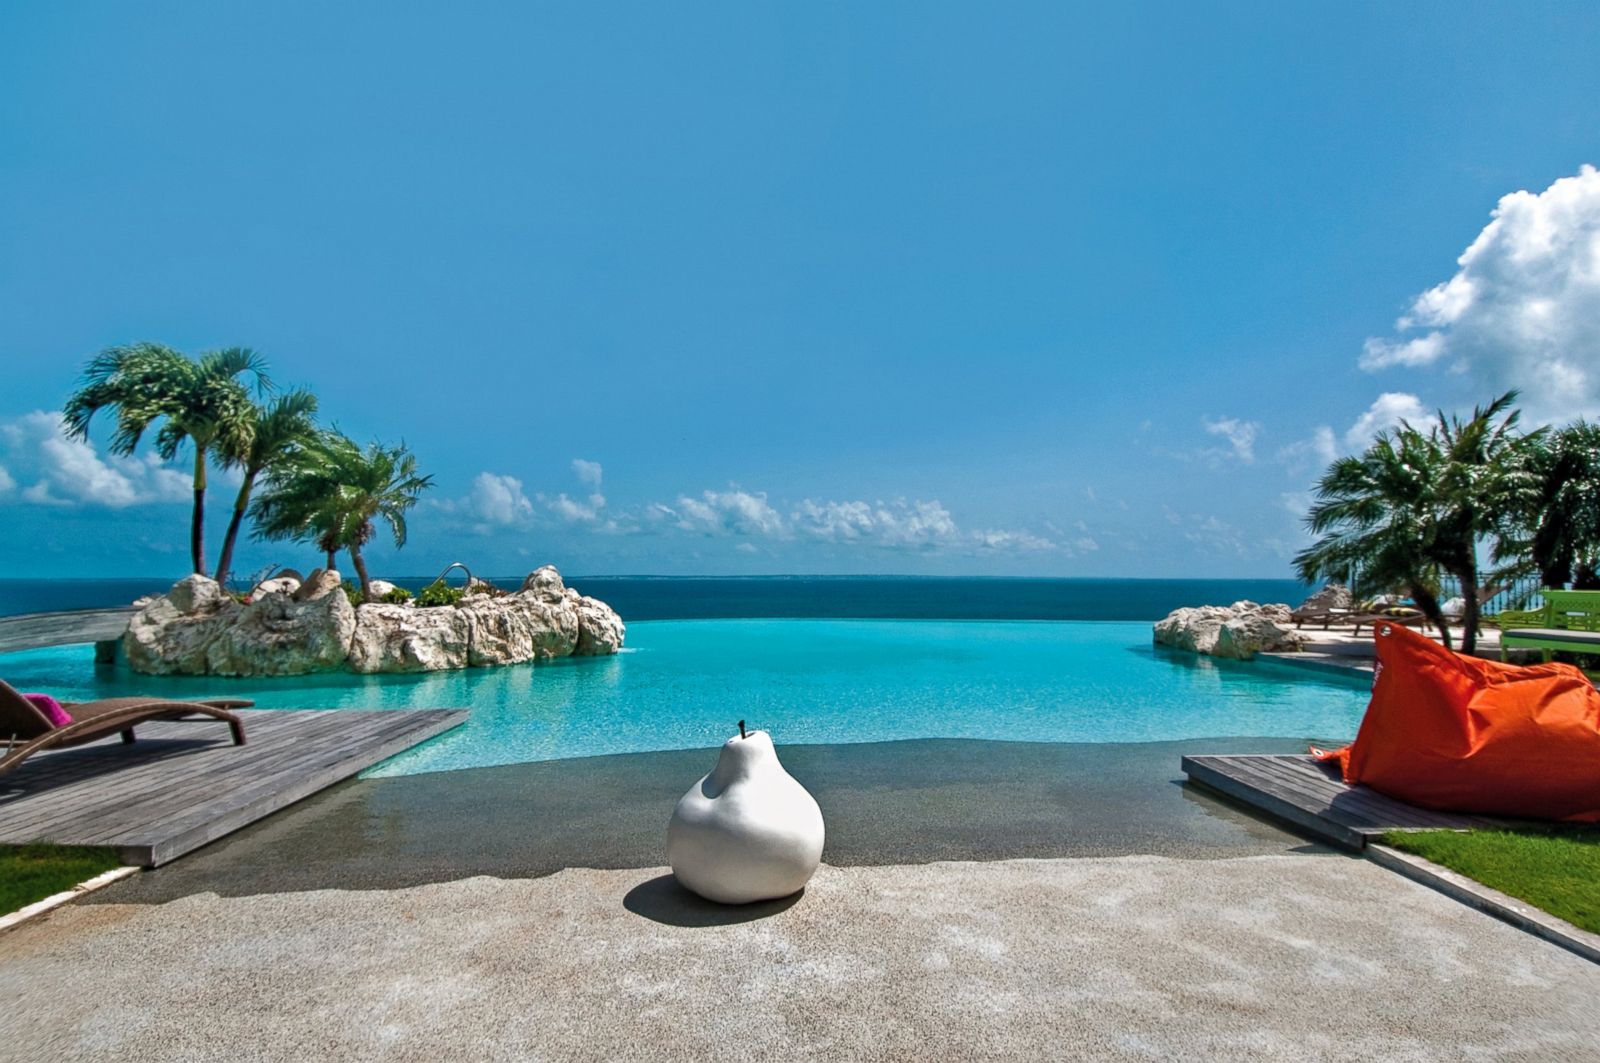 The 10 Best Infinity Pools In The World According To